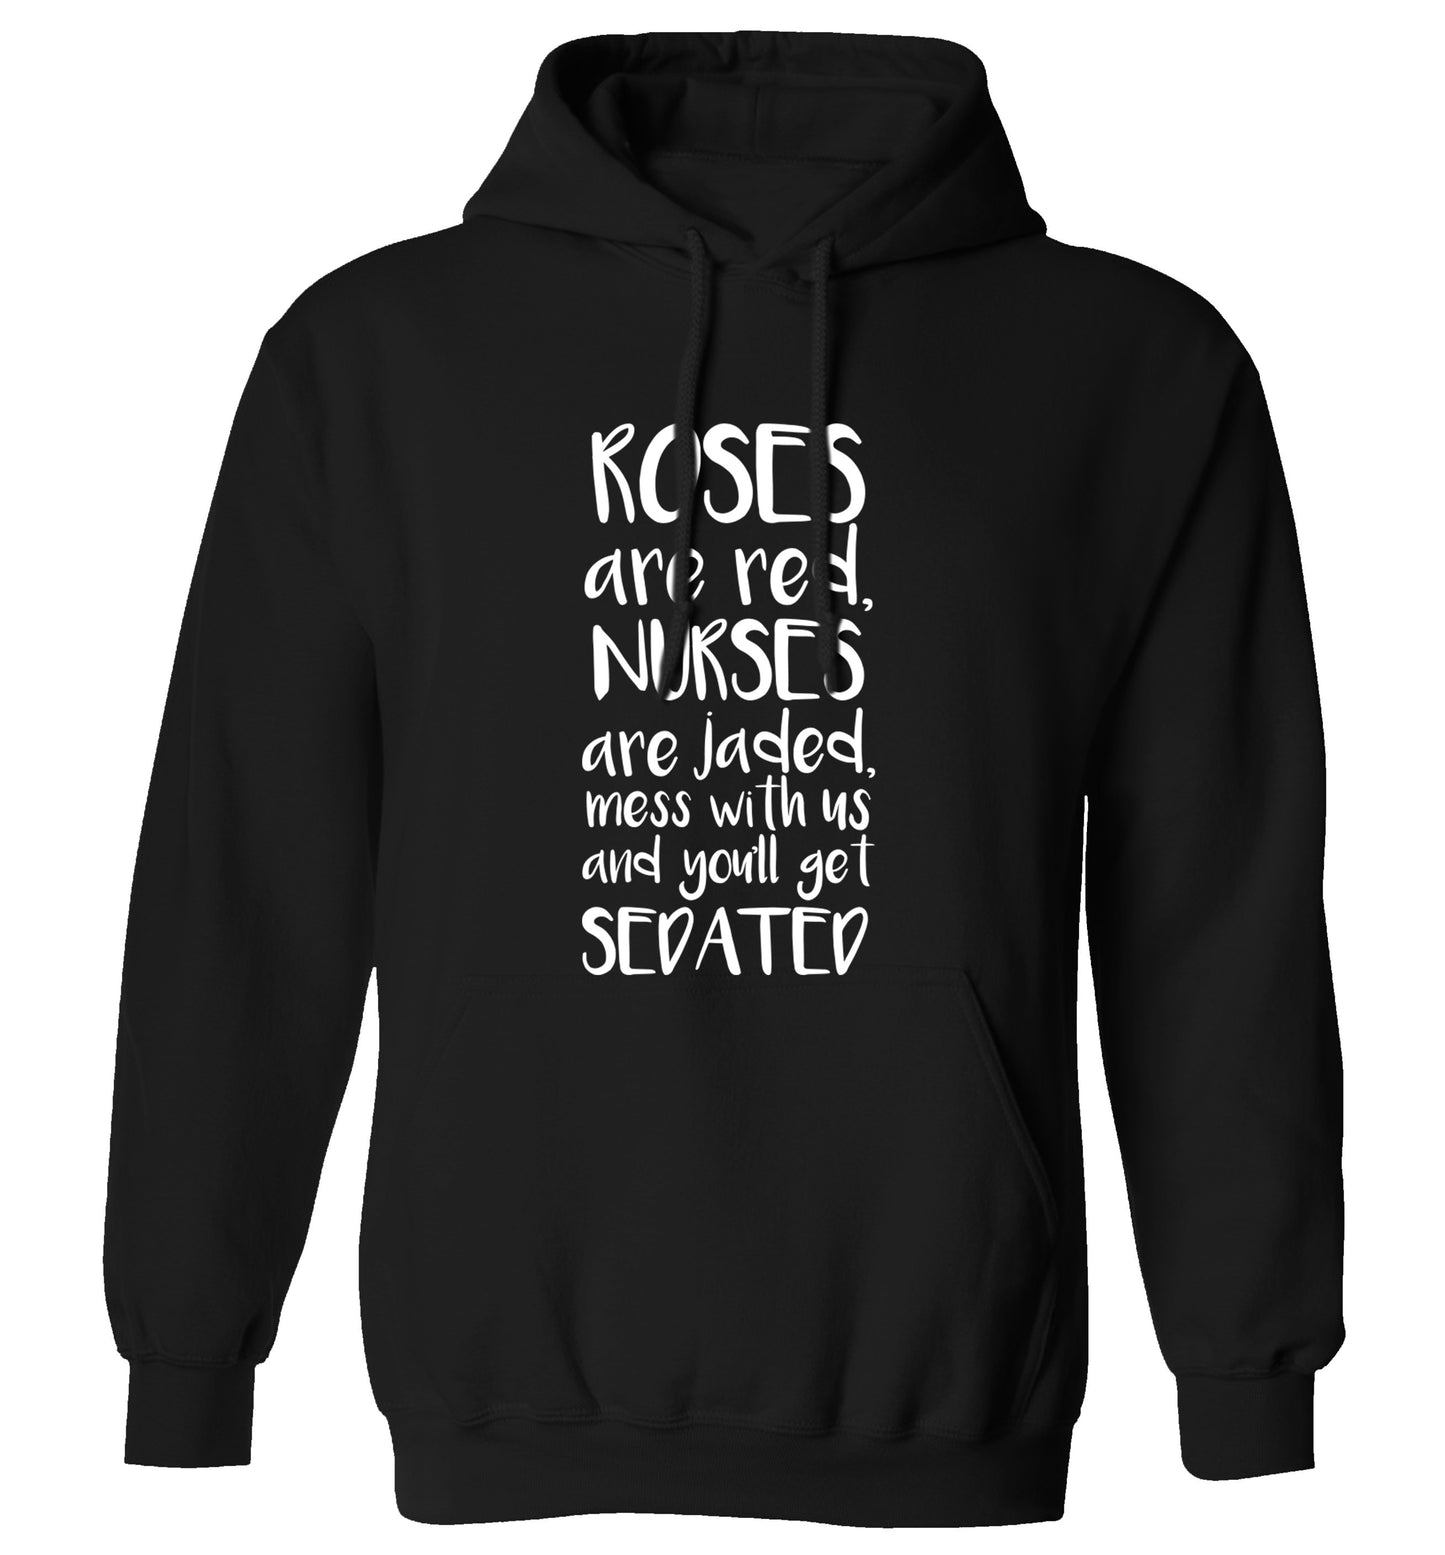 Roses are red, nurses are jaded, mess with us and you'll get sedated adults unisex black hoodie 2XL